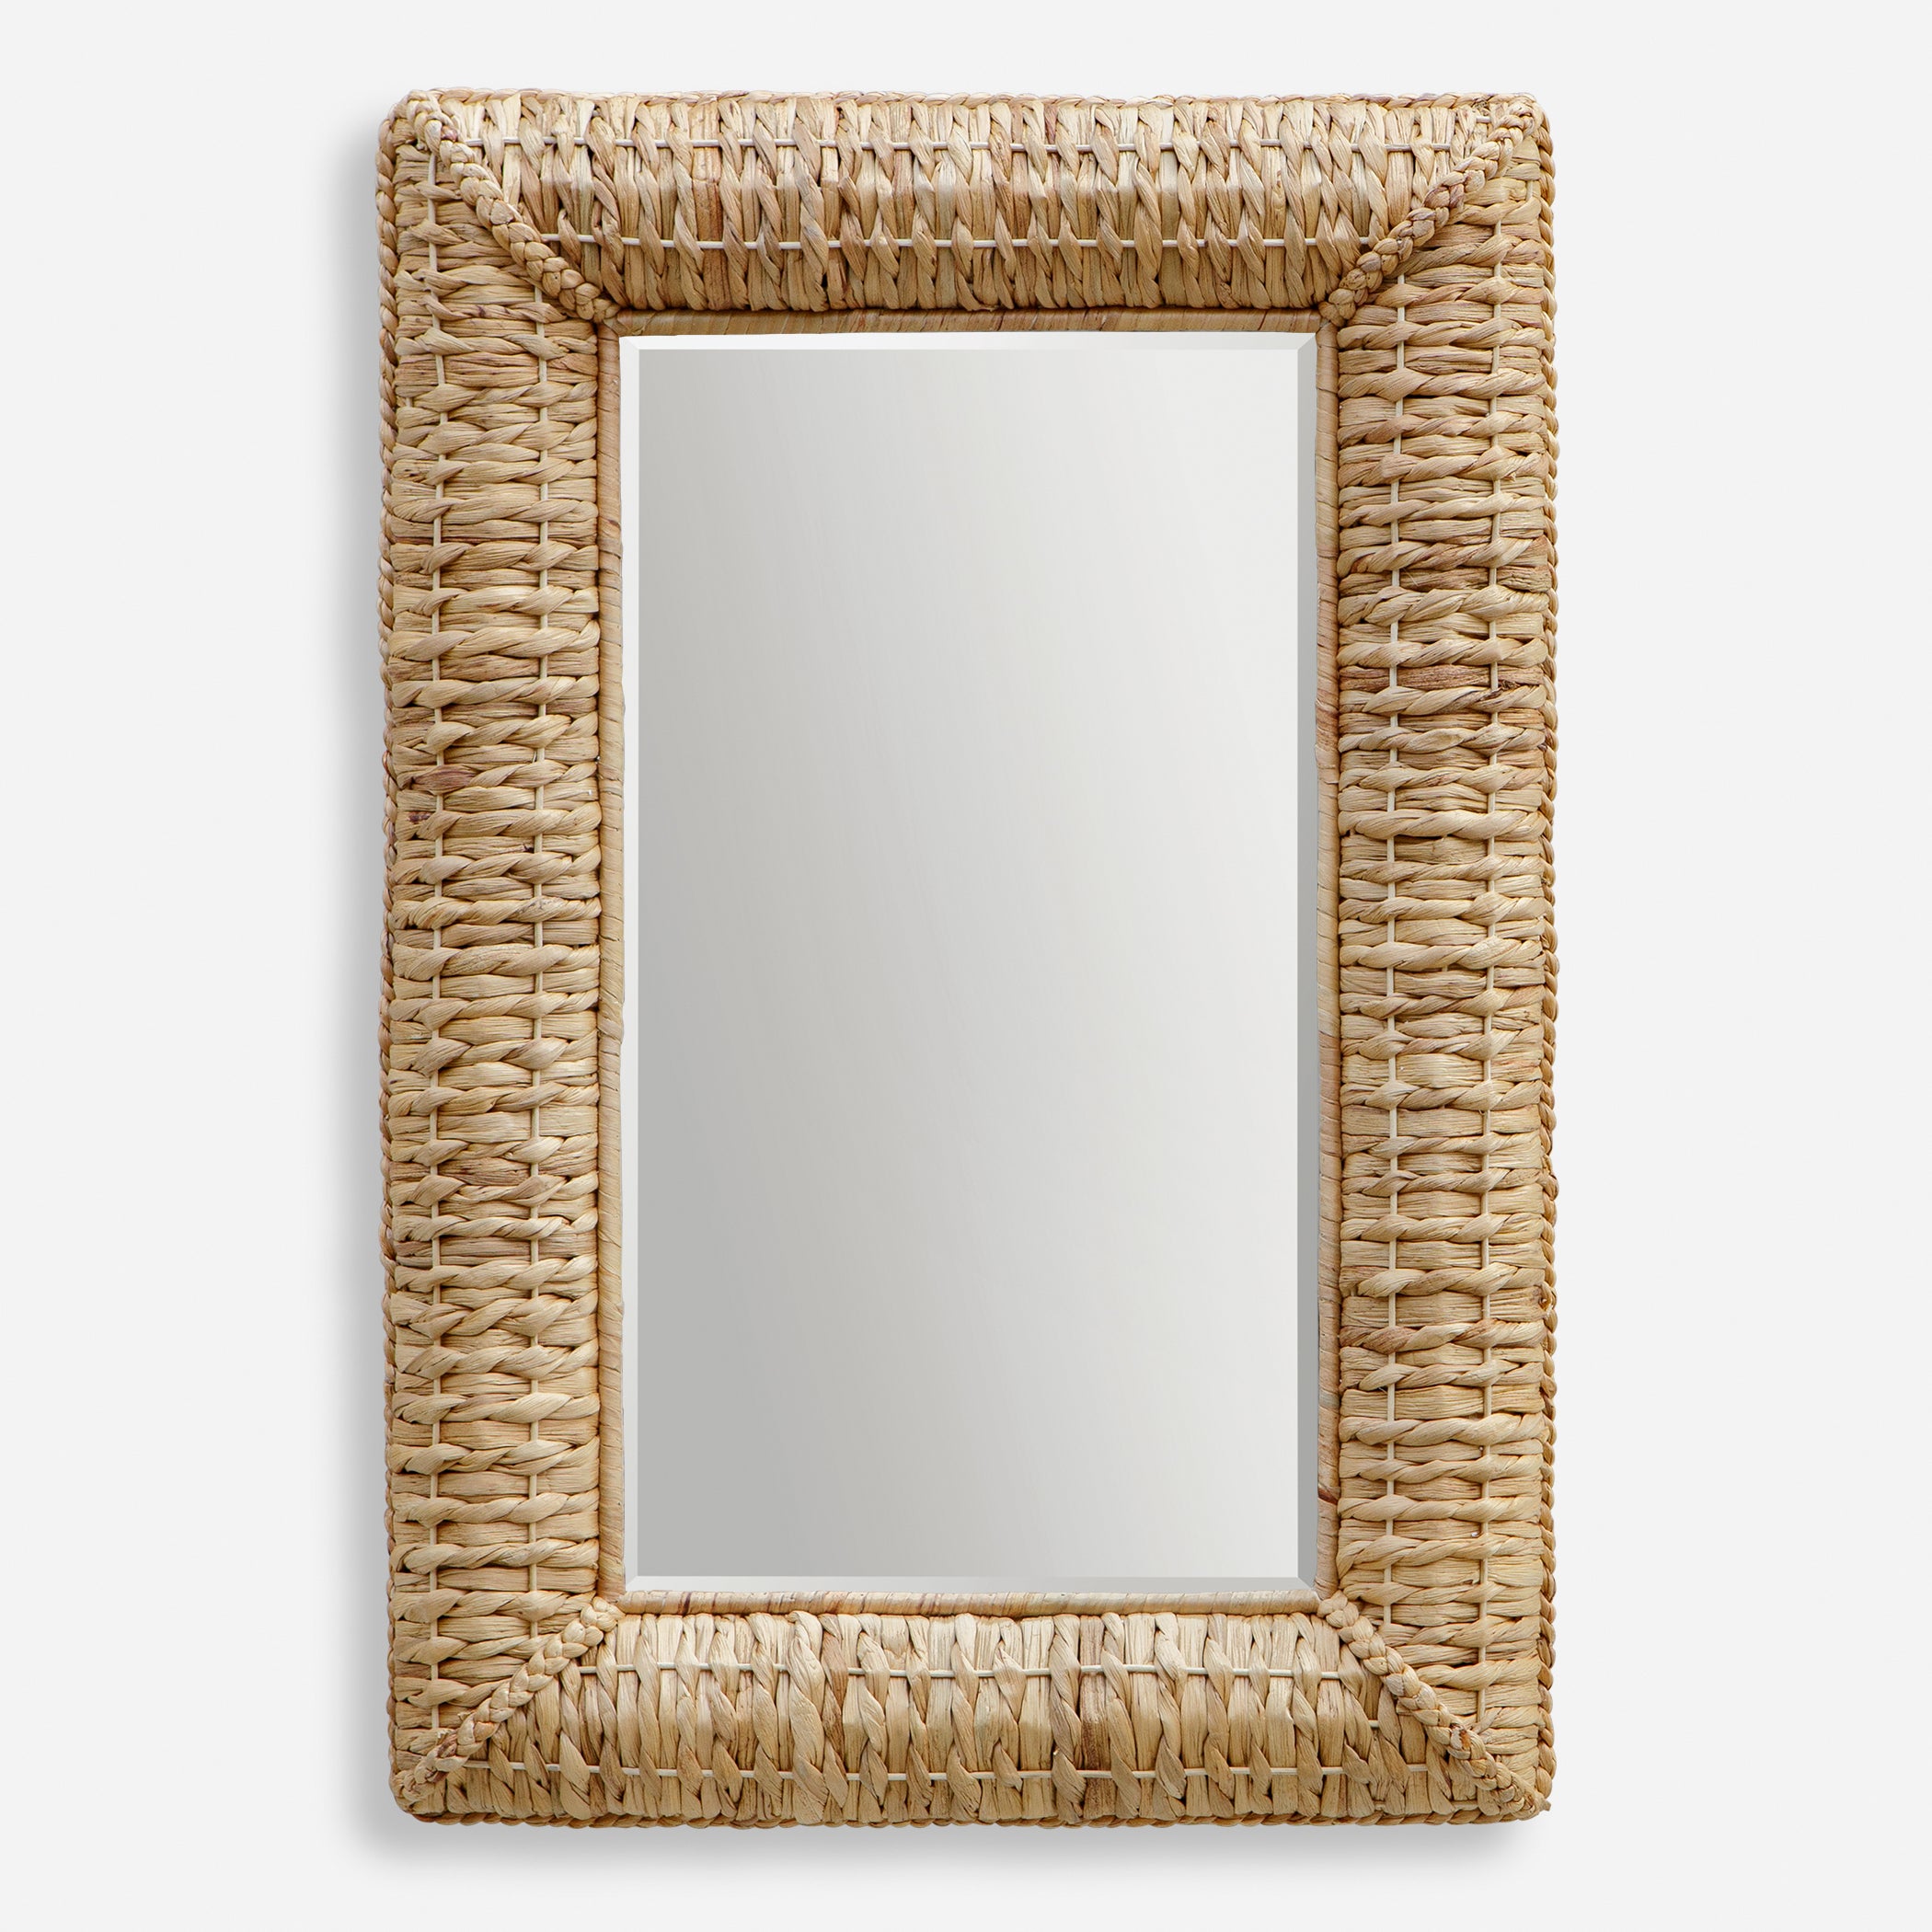 Uttermost Twisted Seagrass Seagrass Rectangle Mirror